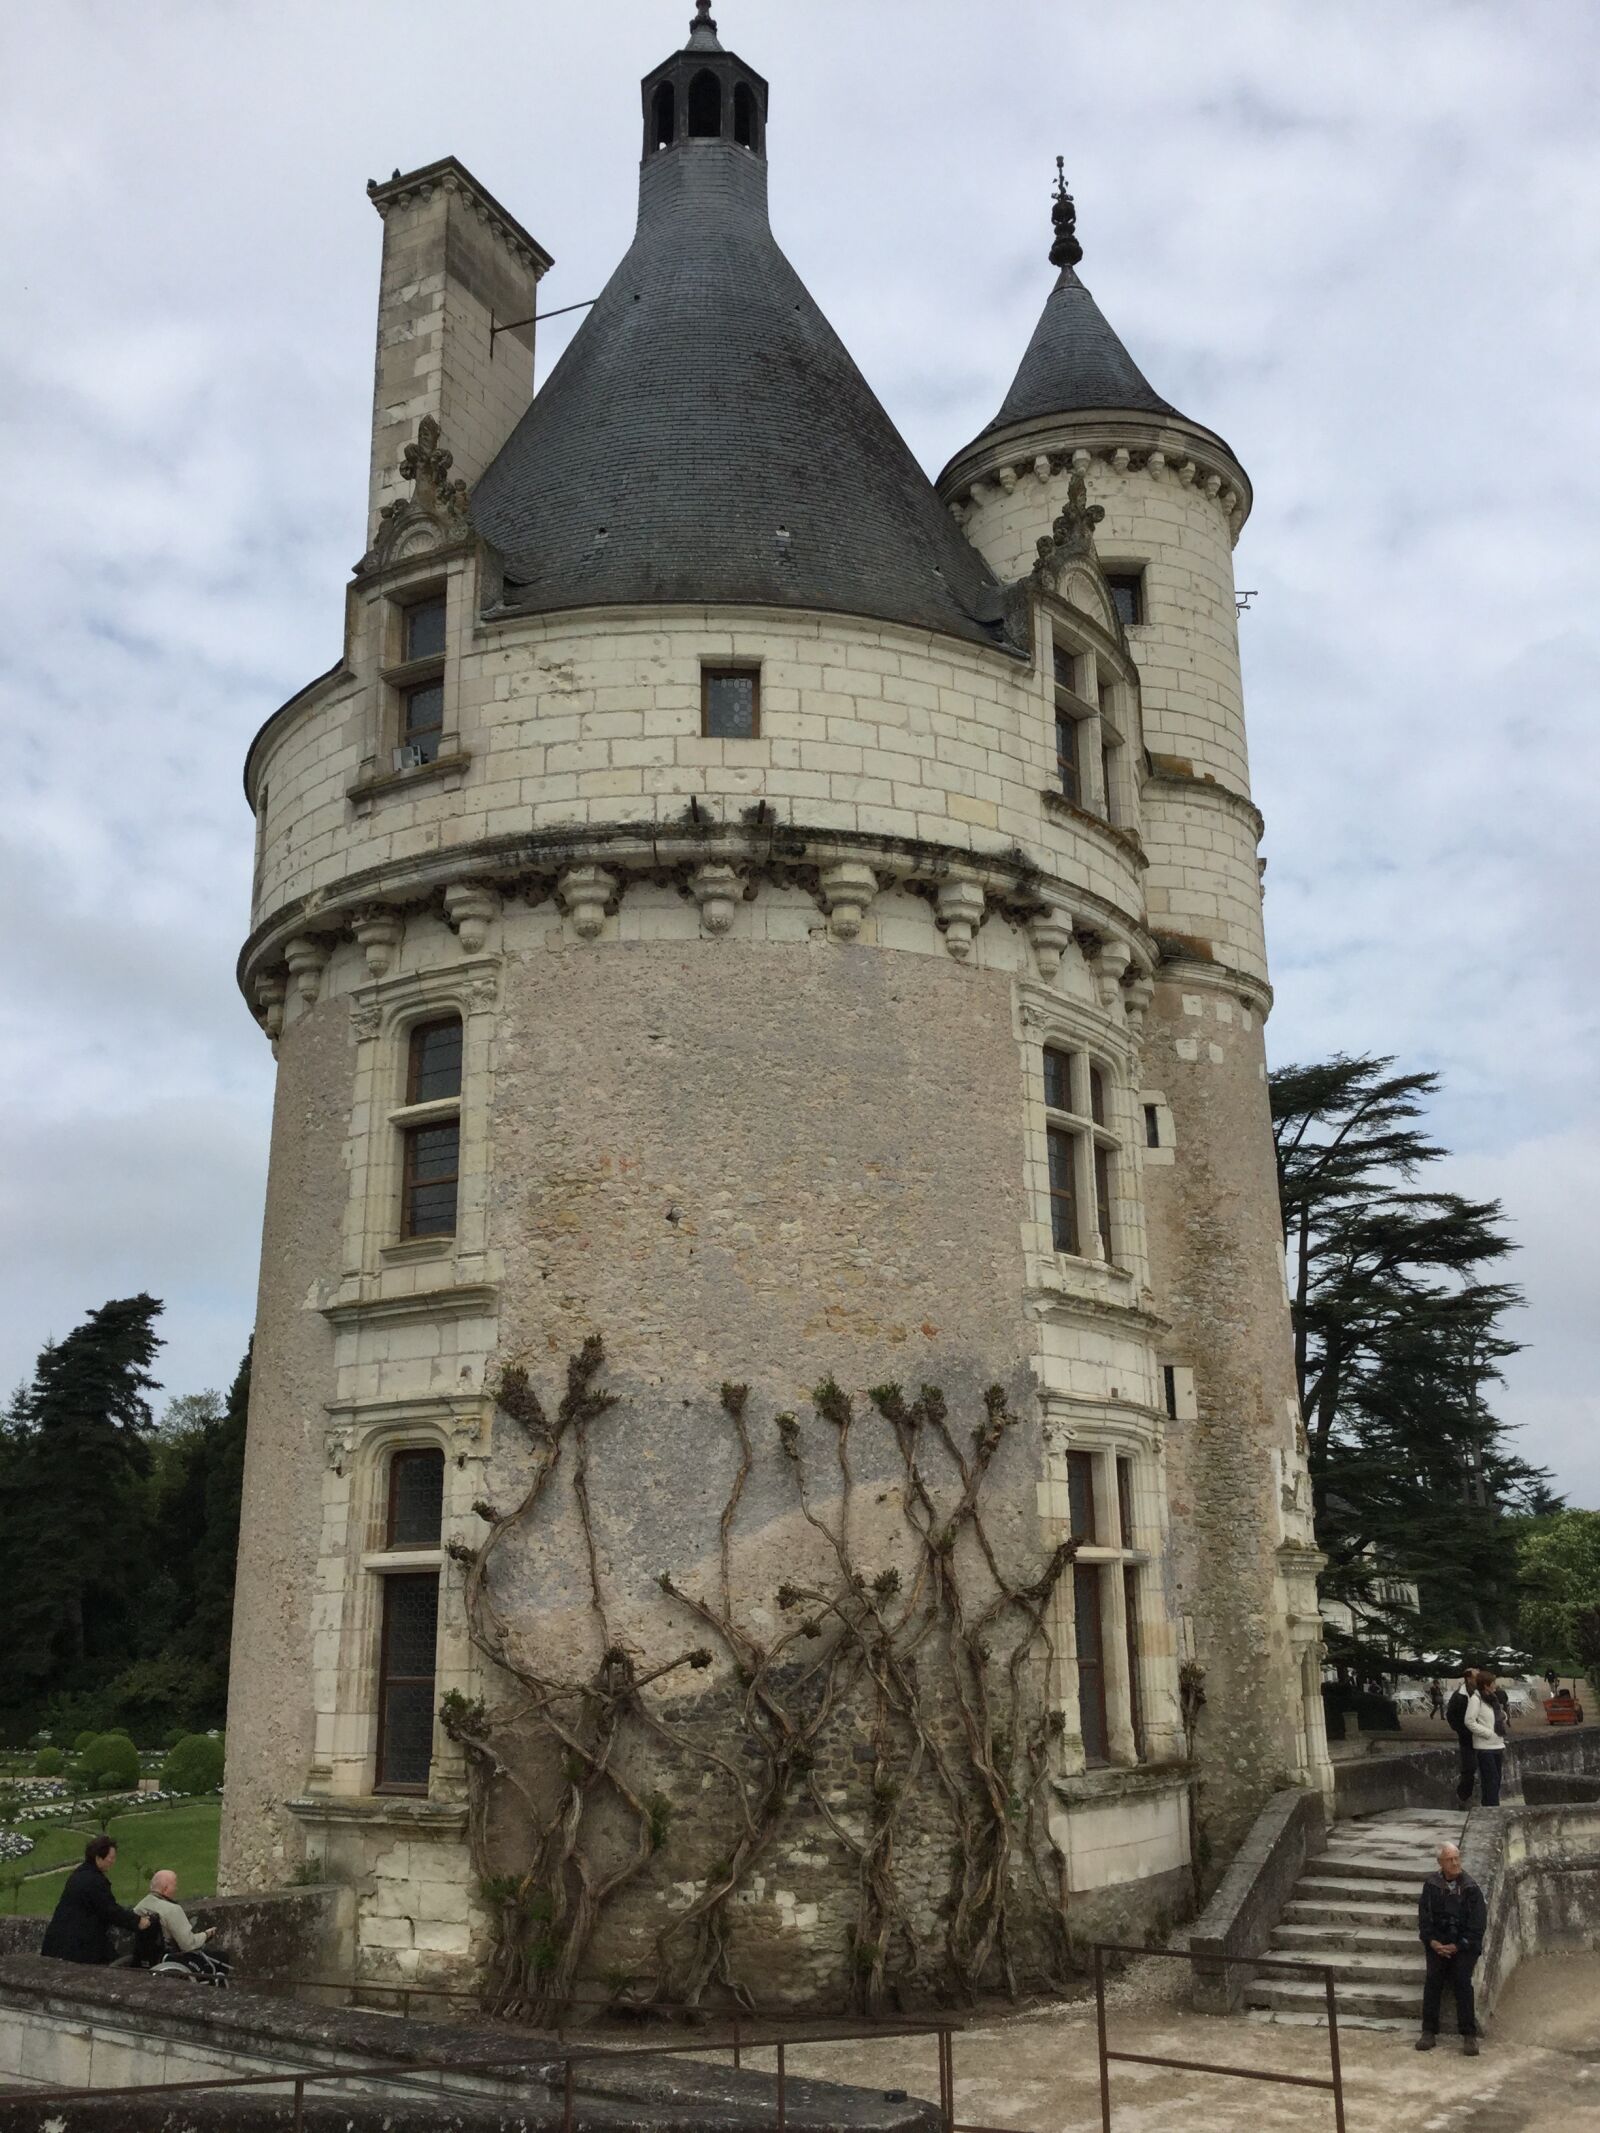 iPad Air 2 back camera 3.3mm f/2.4 sample photo. Castle, medieval, chenonceau photography